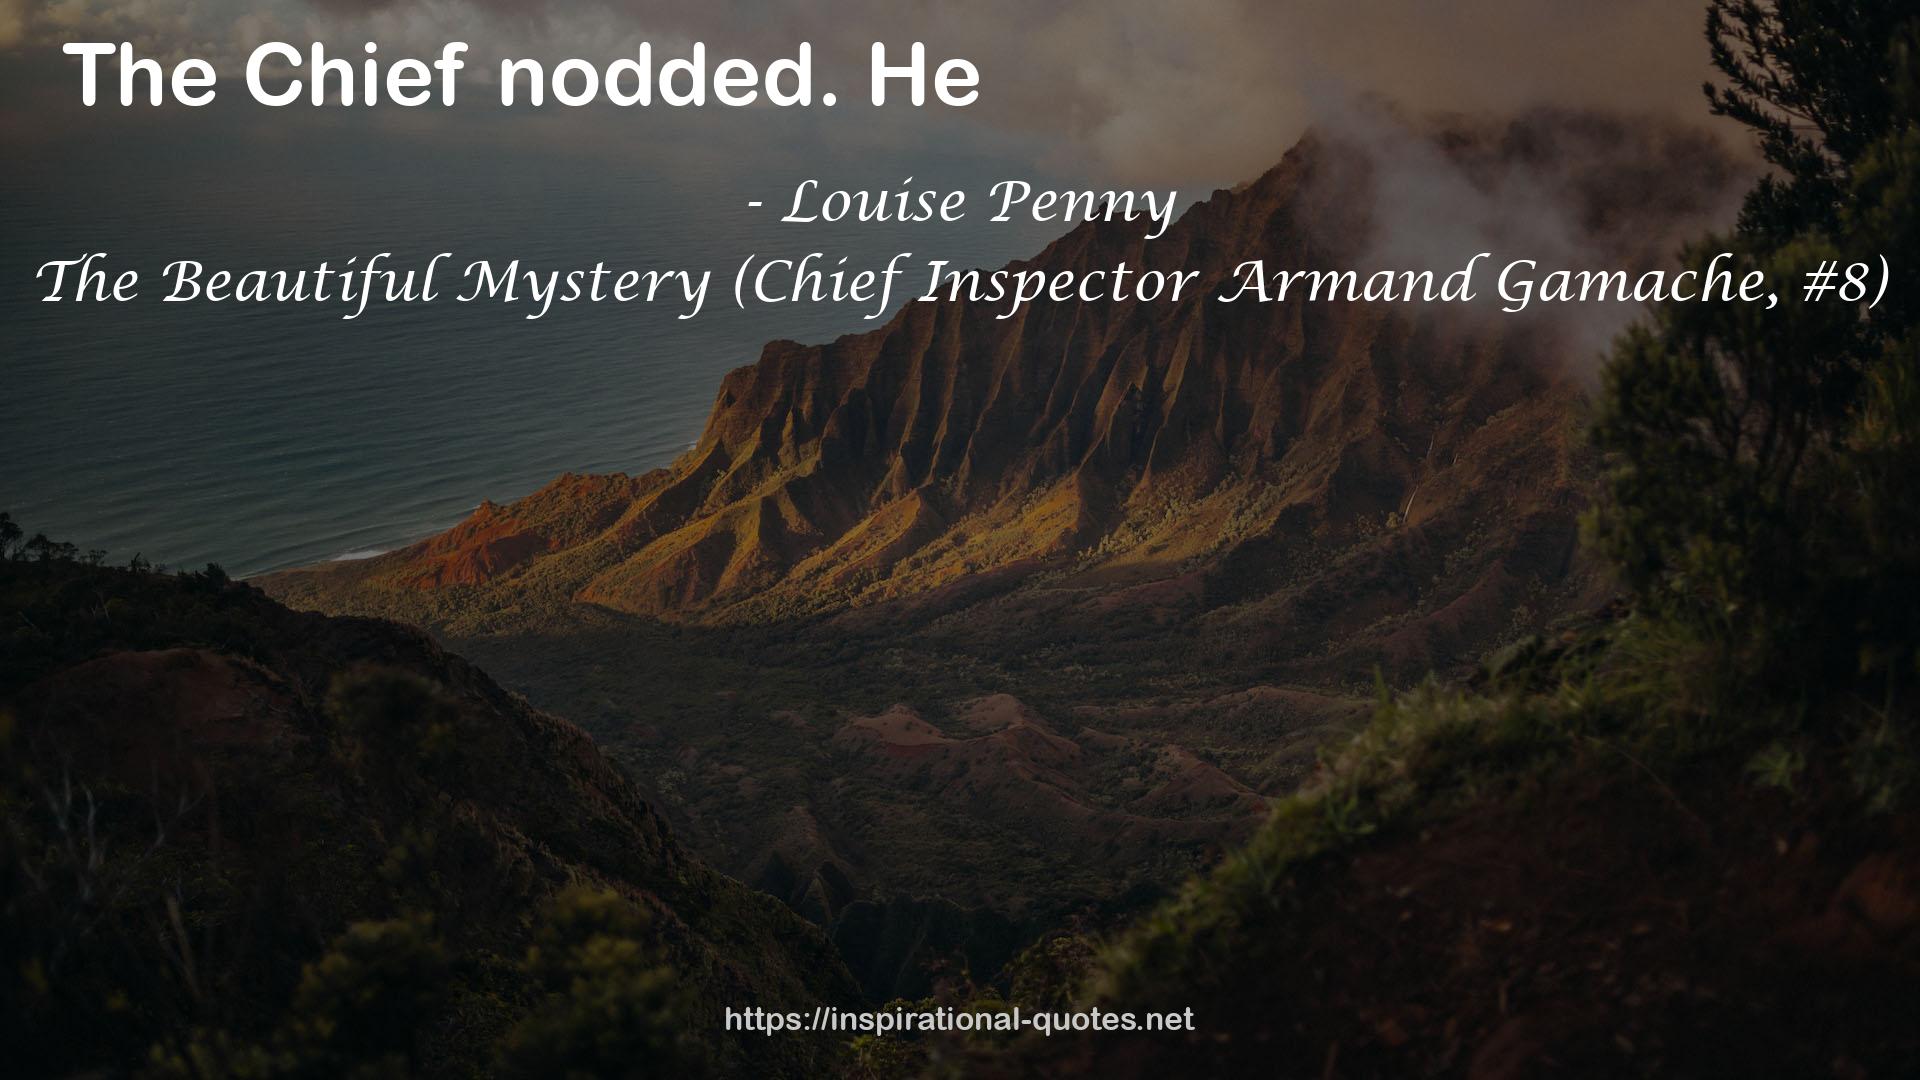 The Beautiful Mystery (Chief Inspector Armand Gamache, #8) QUOTES